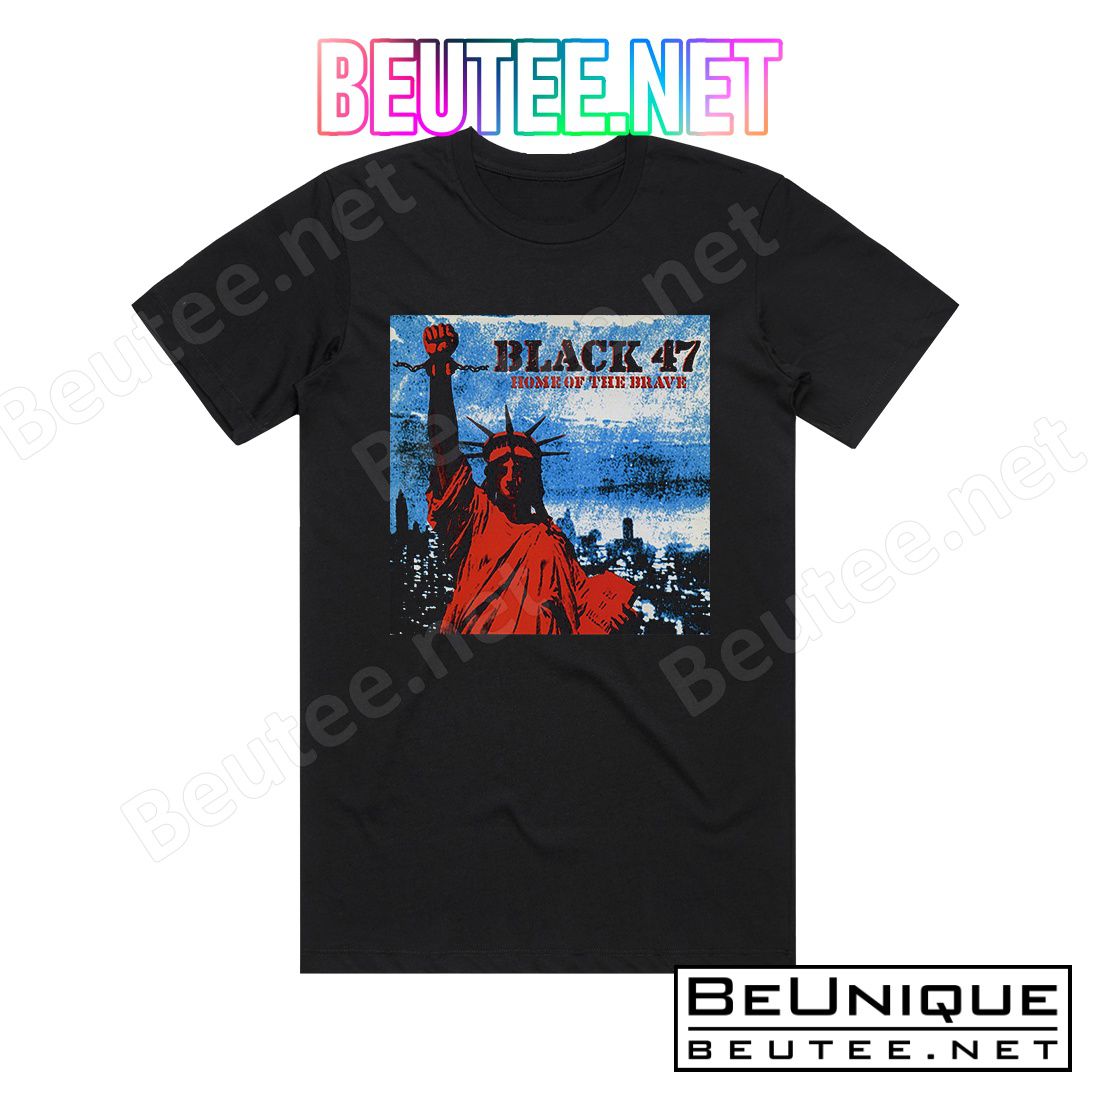 Black 47 Home Of The Brave Album Cover T-Shirt